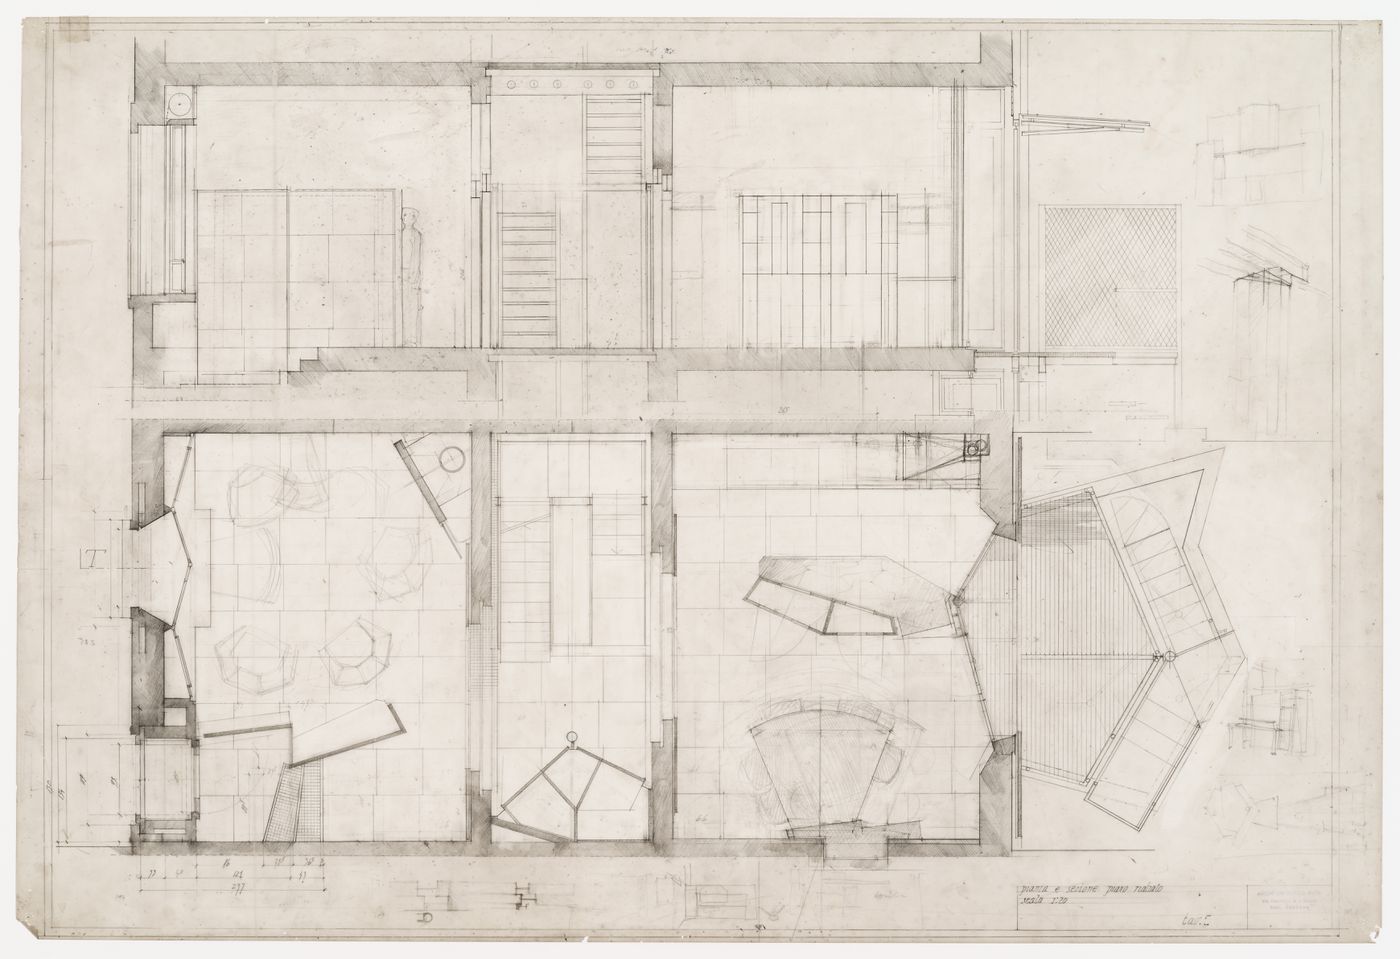 Plan and section of raised ground floor showing entrance, living room, closet, kitchen, dining room and loggia for Casa Frea, Milan, Italy